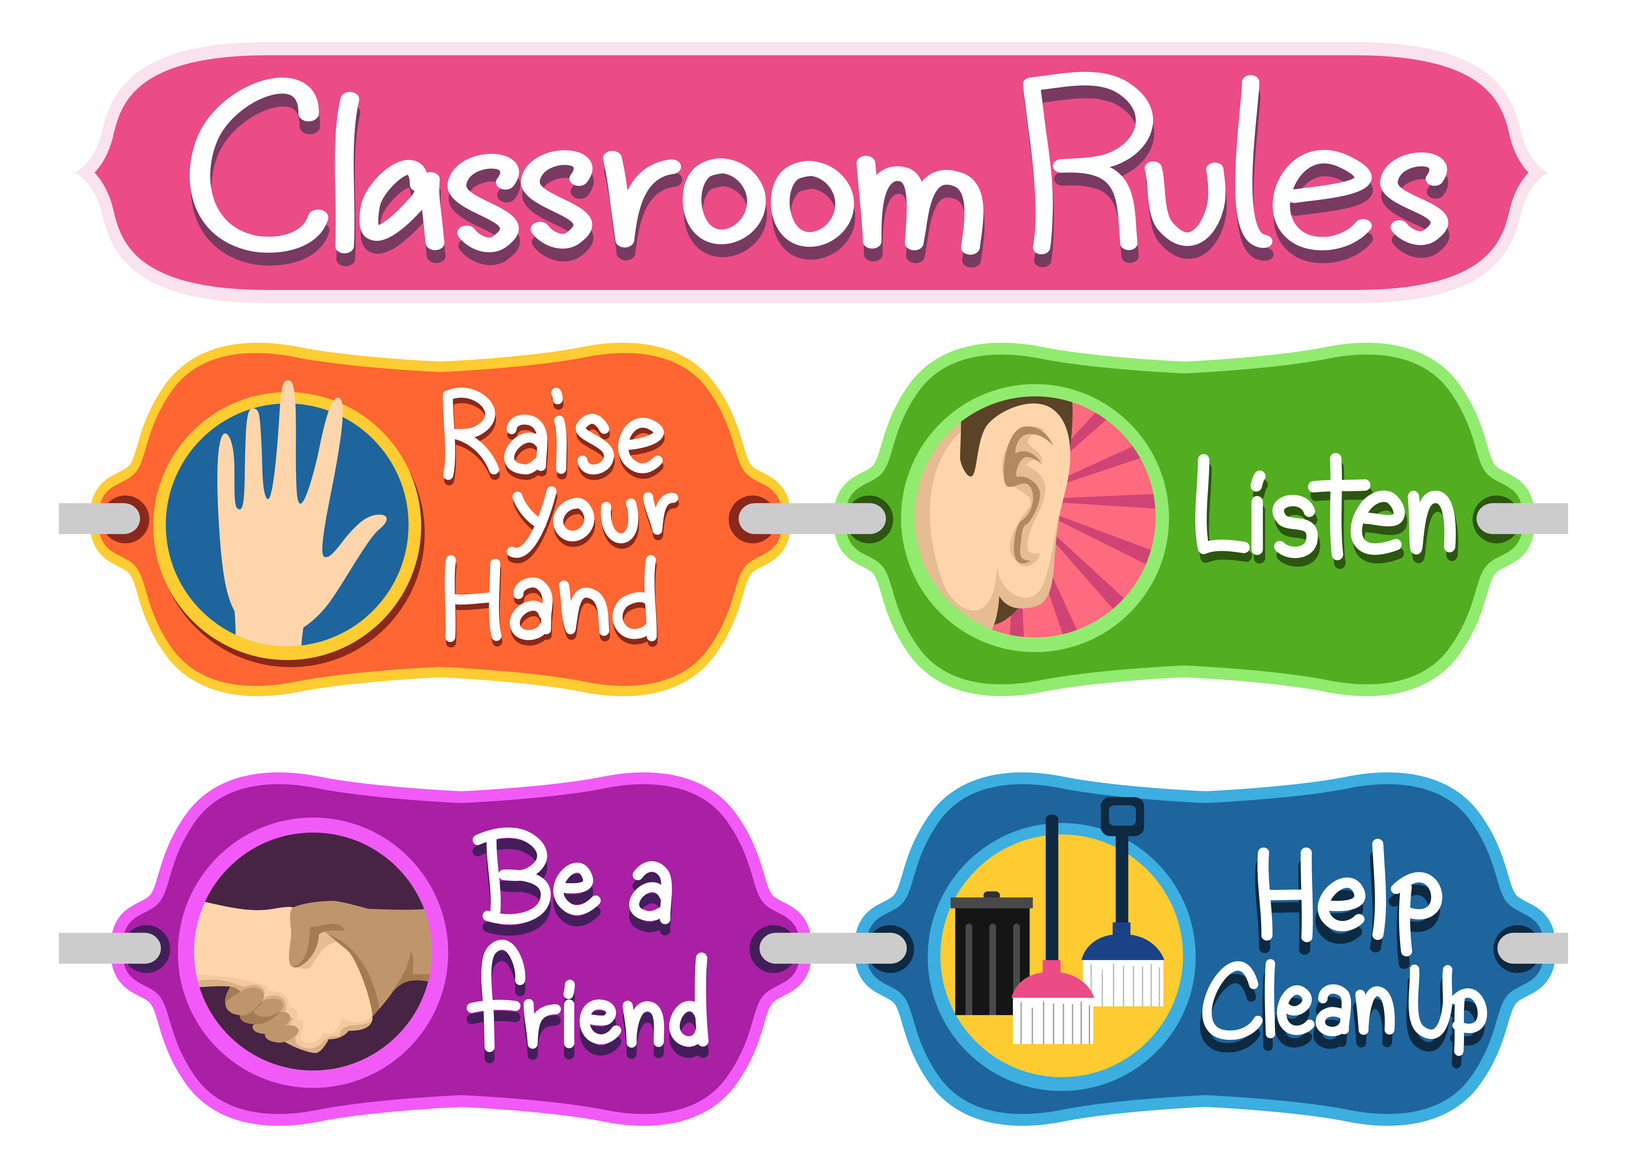 A Classroom Rules Poster